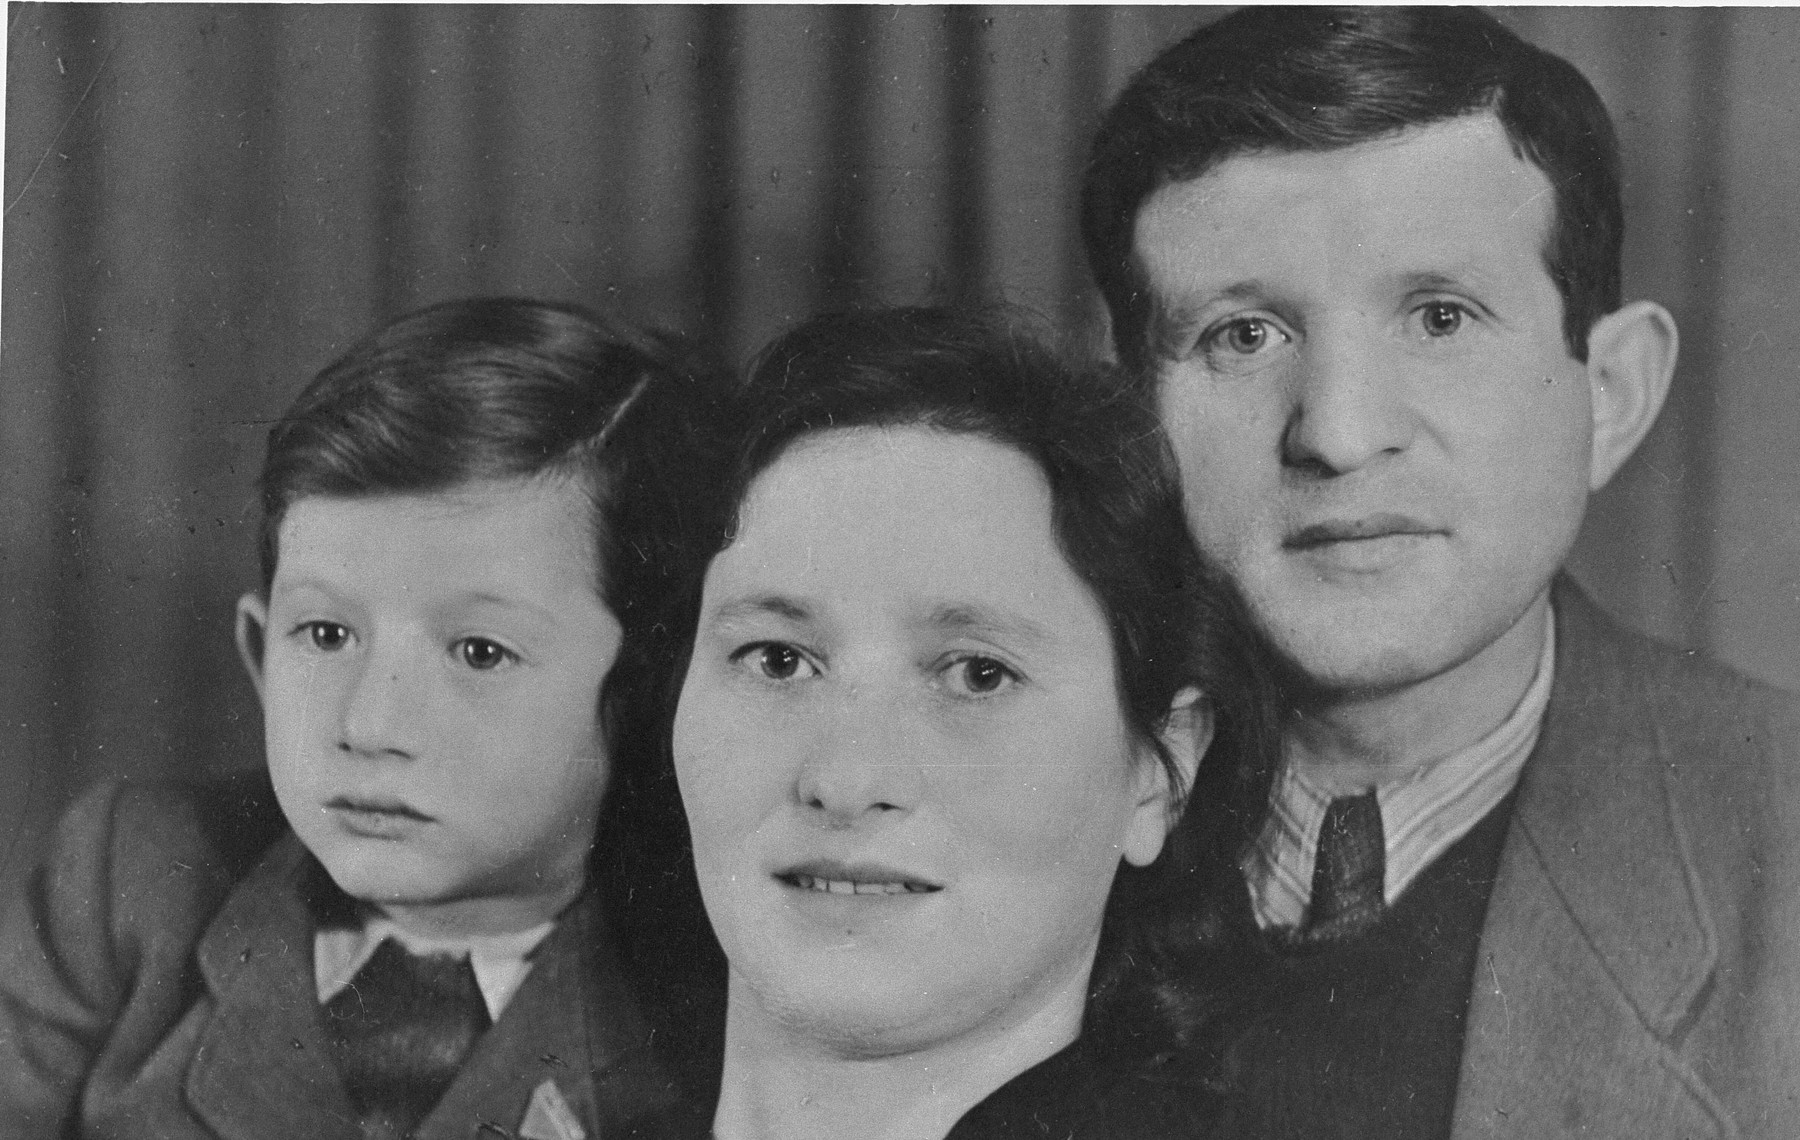 Portrait of a Jewish DP family in postwar Germany.

Pictured are Israel and Esther Schleifstein with their son Joseph.